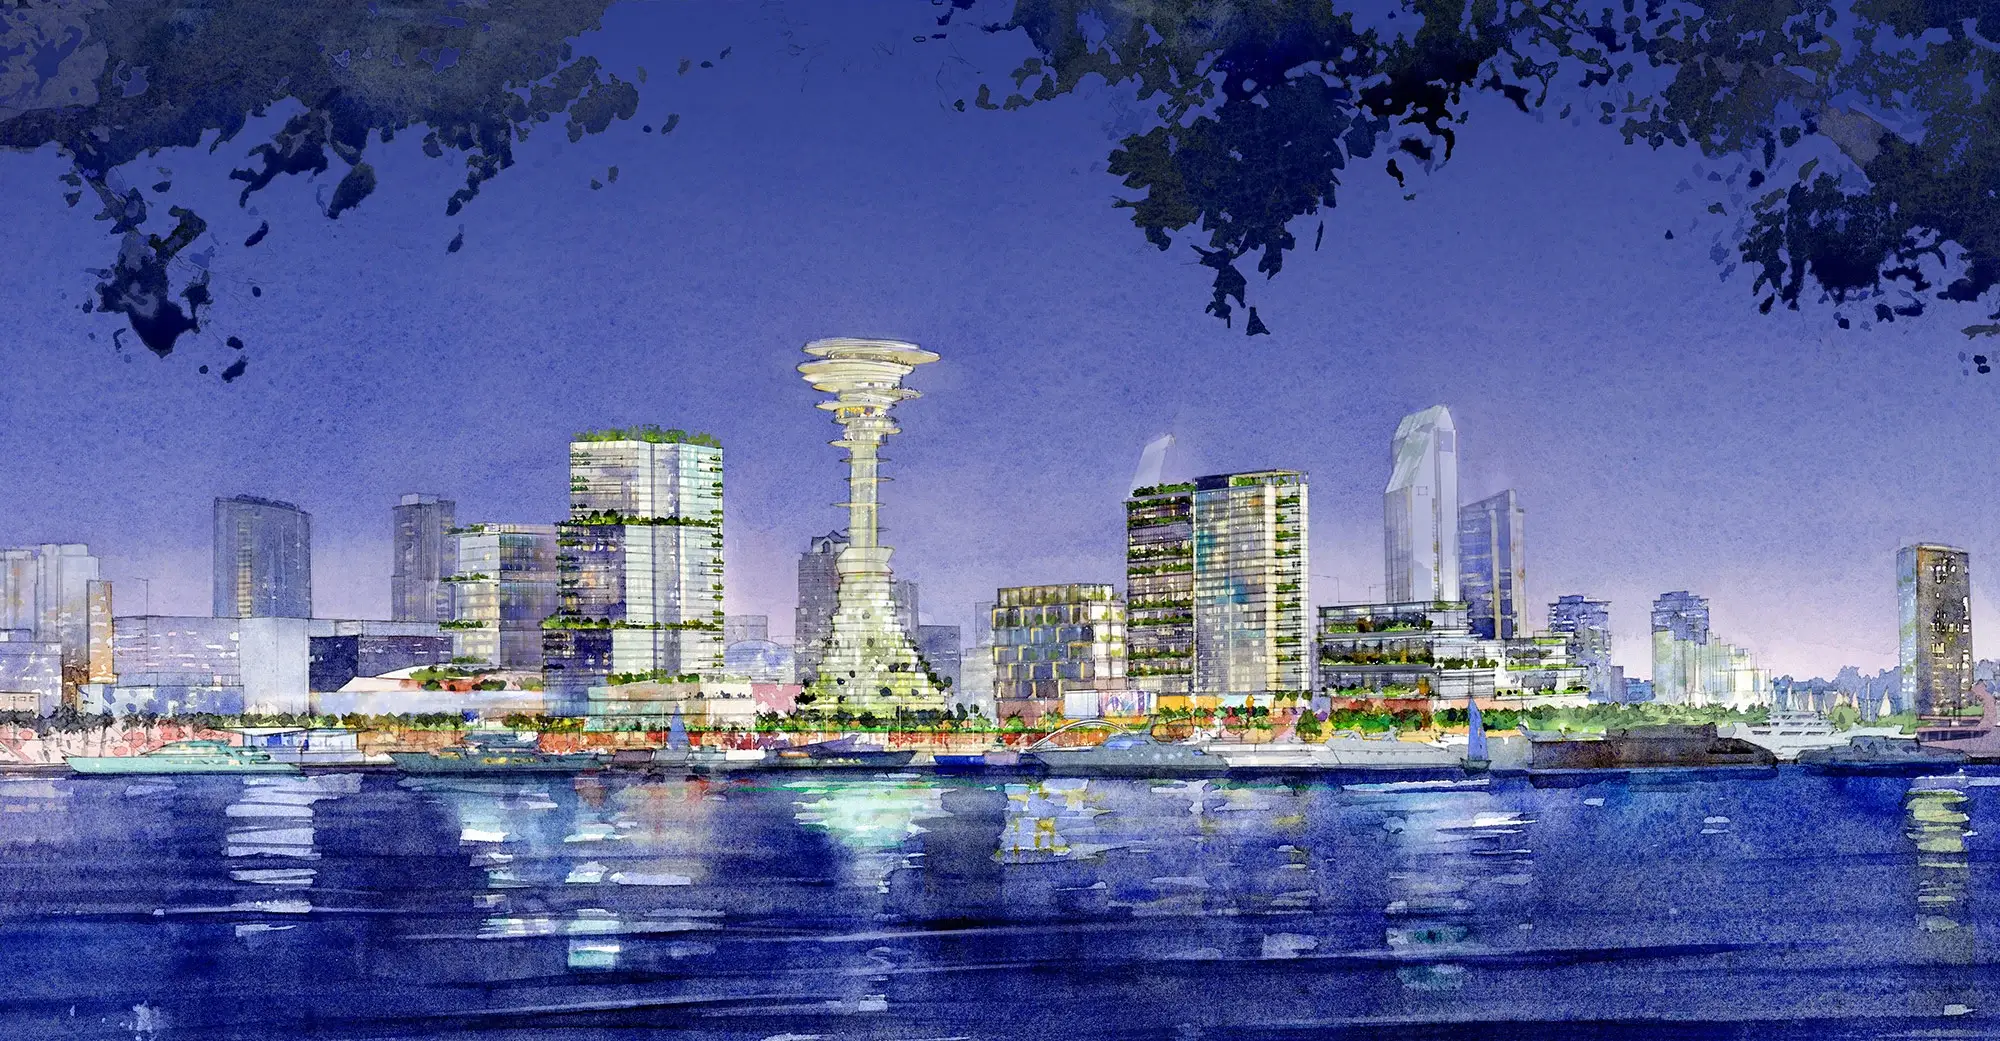 Artist rendering of the San Diego downtown waterfront viewed from Coronado at night.